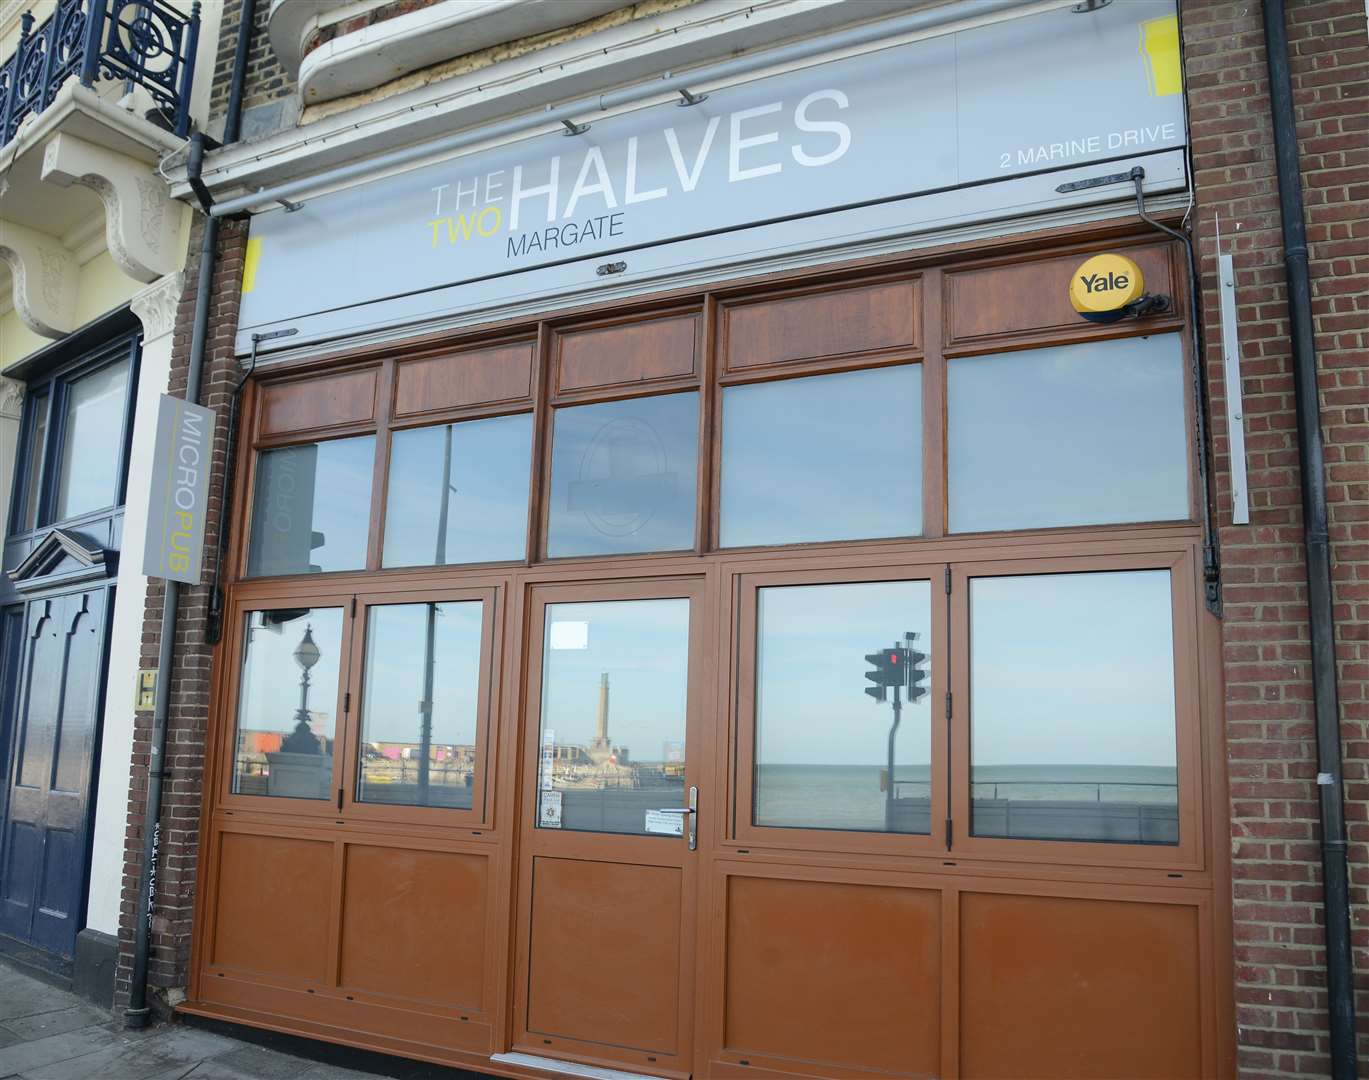 The Two Halves, Margate, is Thanet's micropub that looks out over the seafront. Picture: Gary Browne